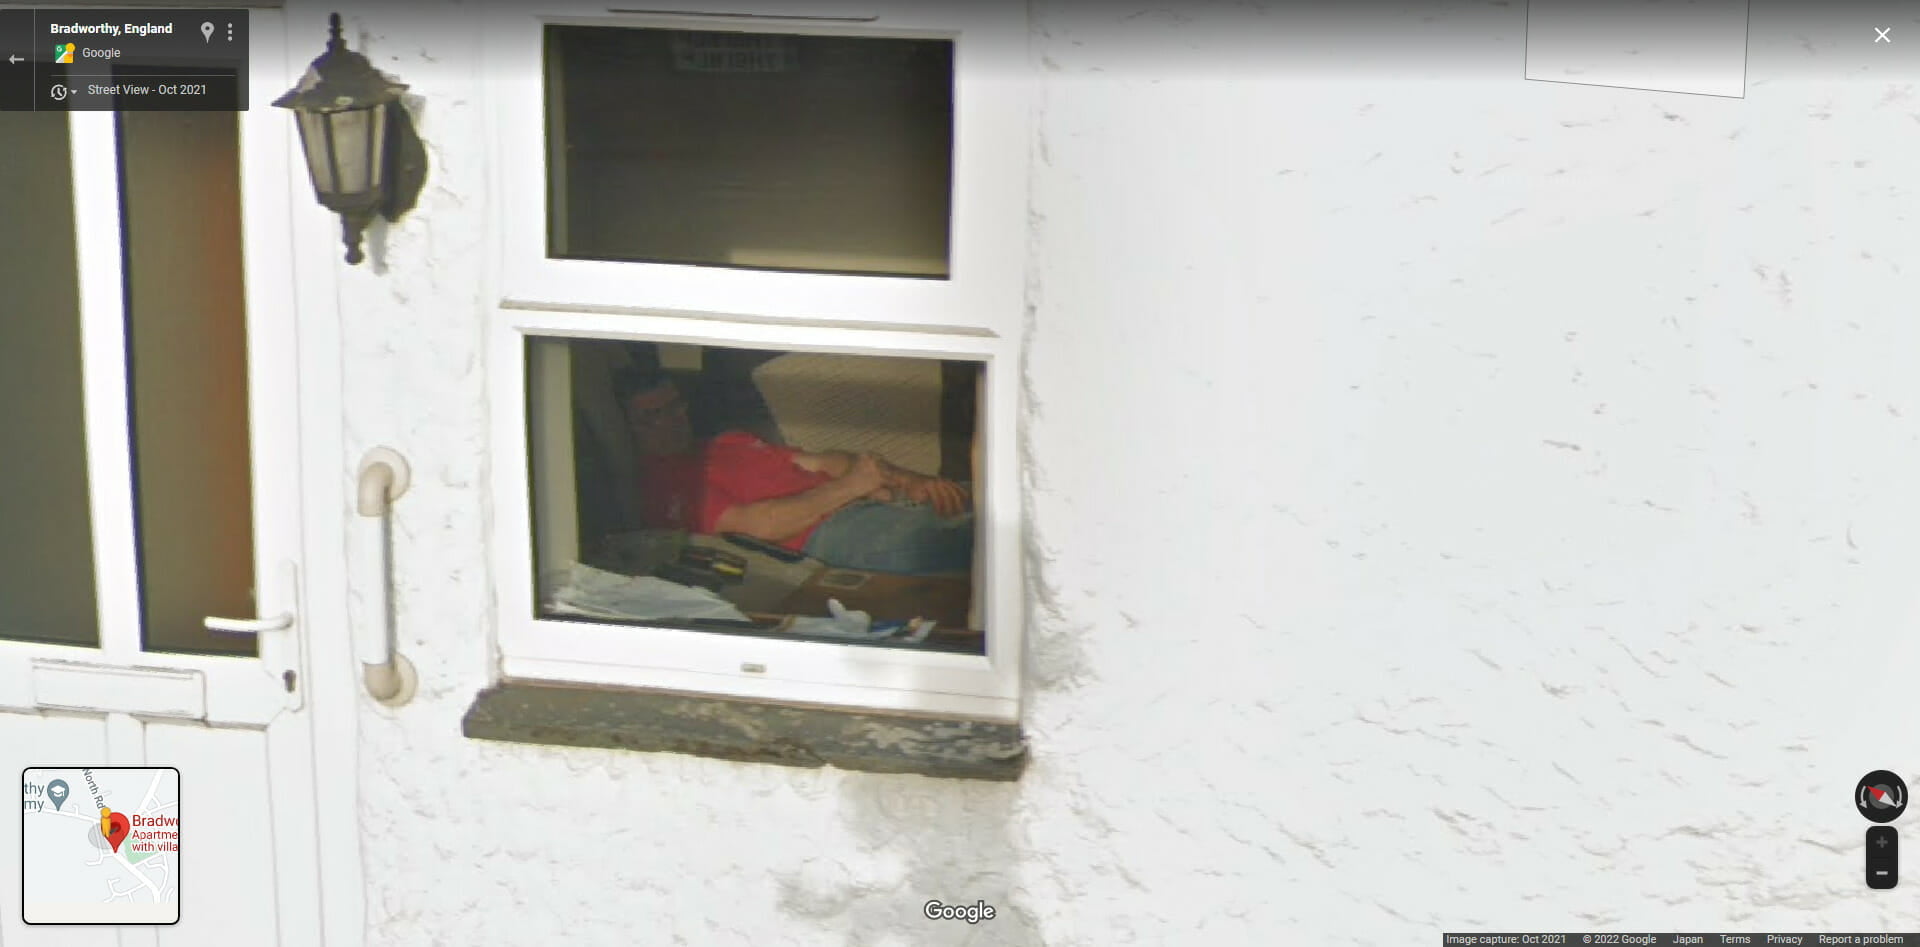 Some dude jerking off, caught on Google in Bradworthy, England